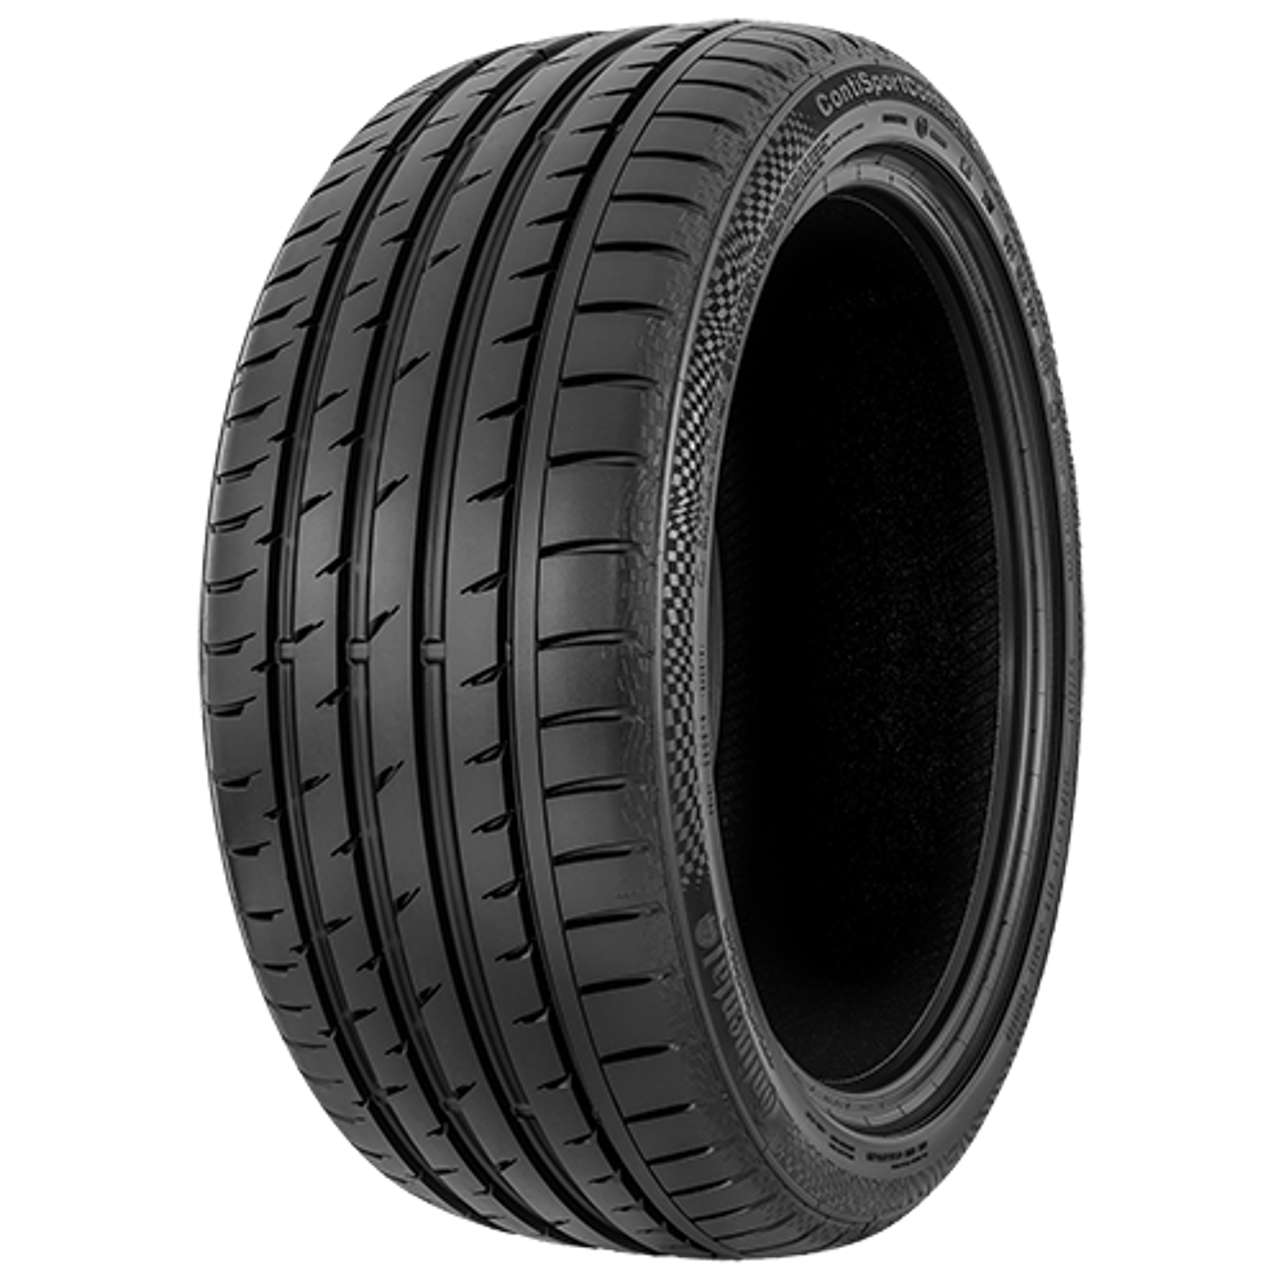 CONTINENTAL CONTISPORTCONTACT 3 (*) SSR 205/45R17 84W 